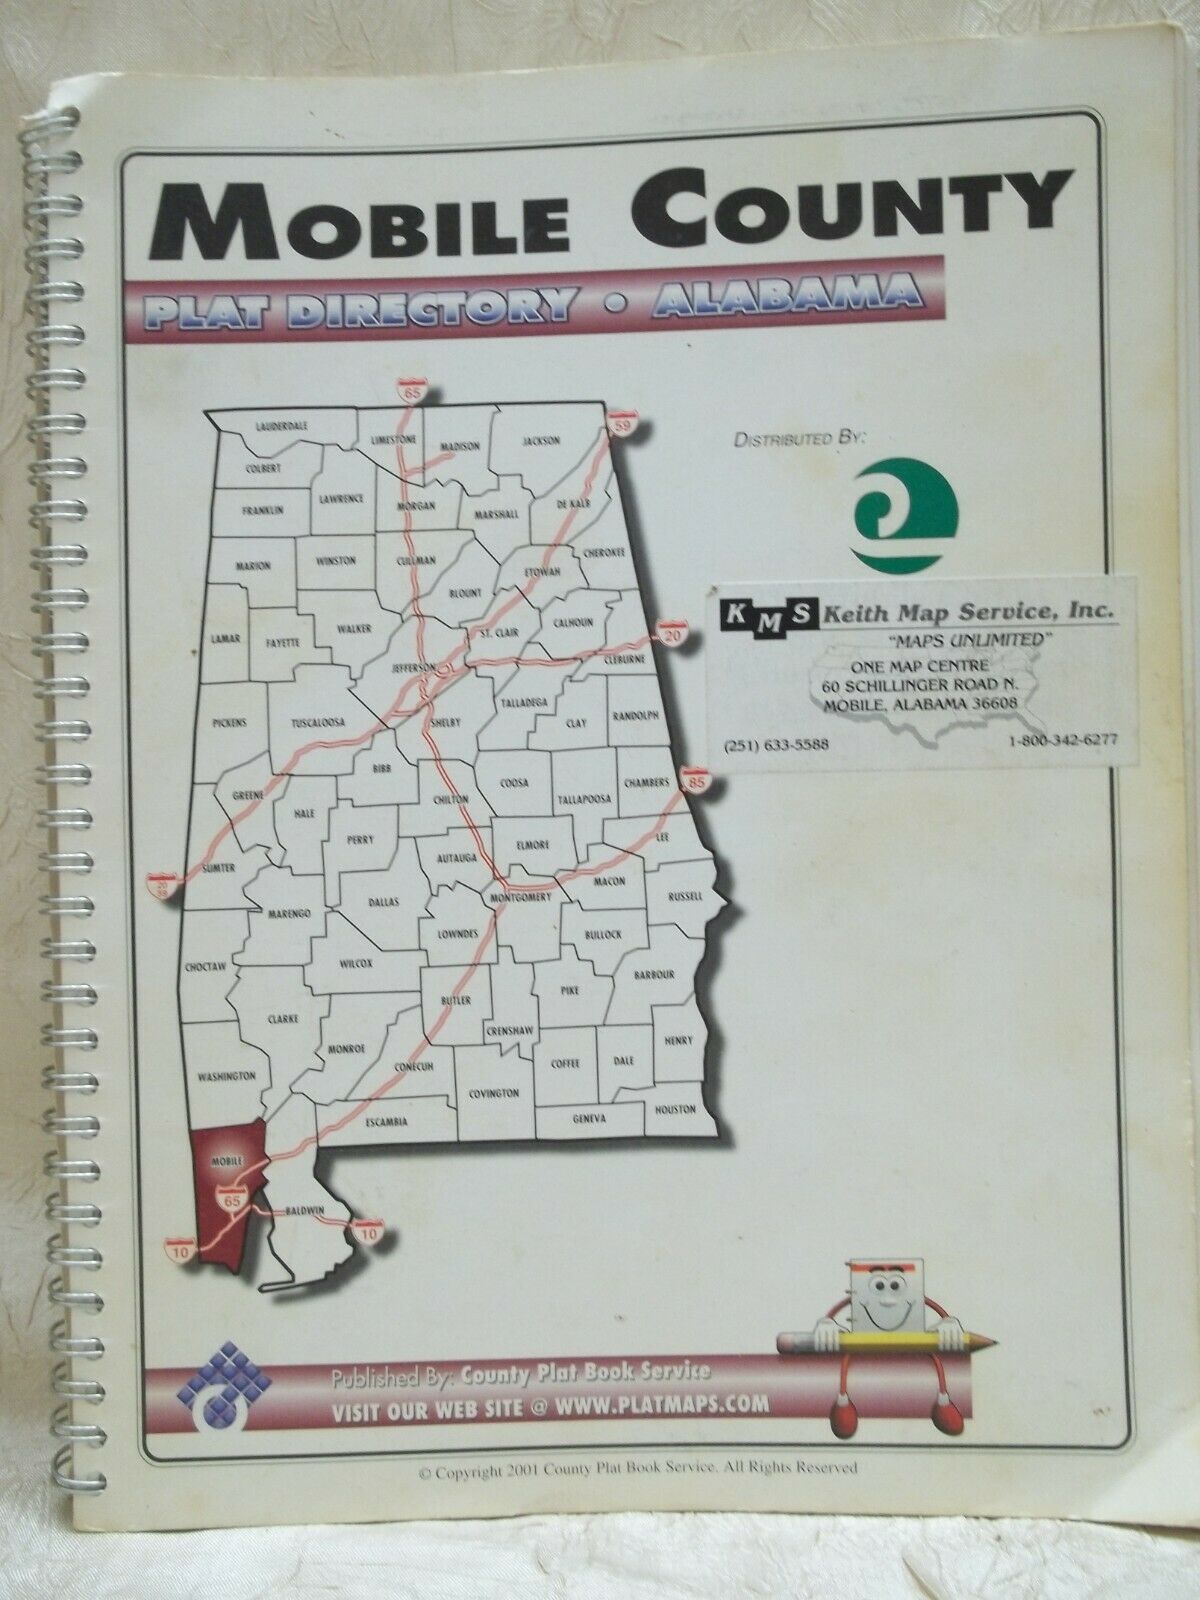 Mobile County Alabama 2001 Plat Directory Map Book County Plat Book Service